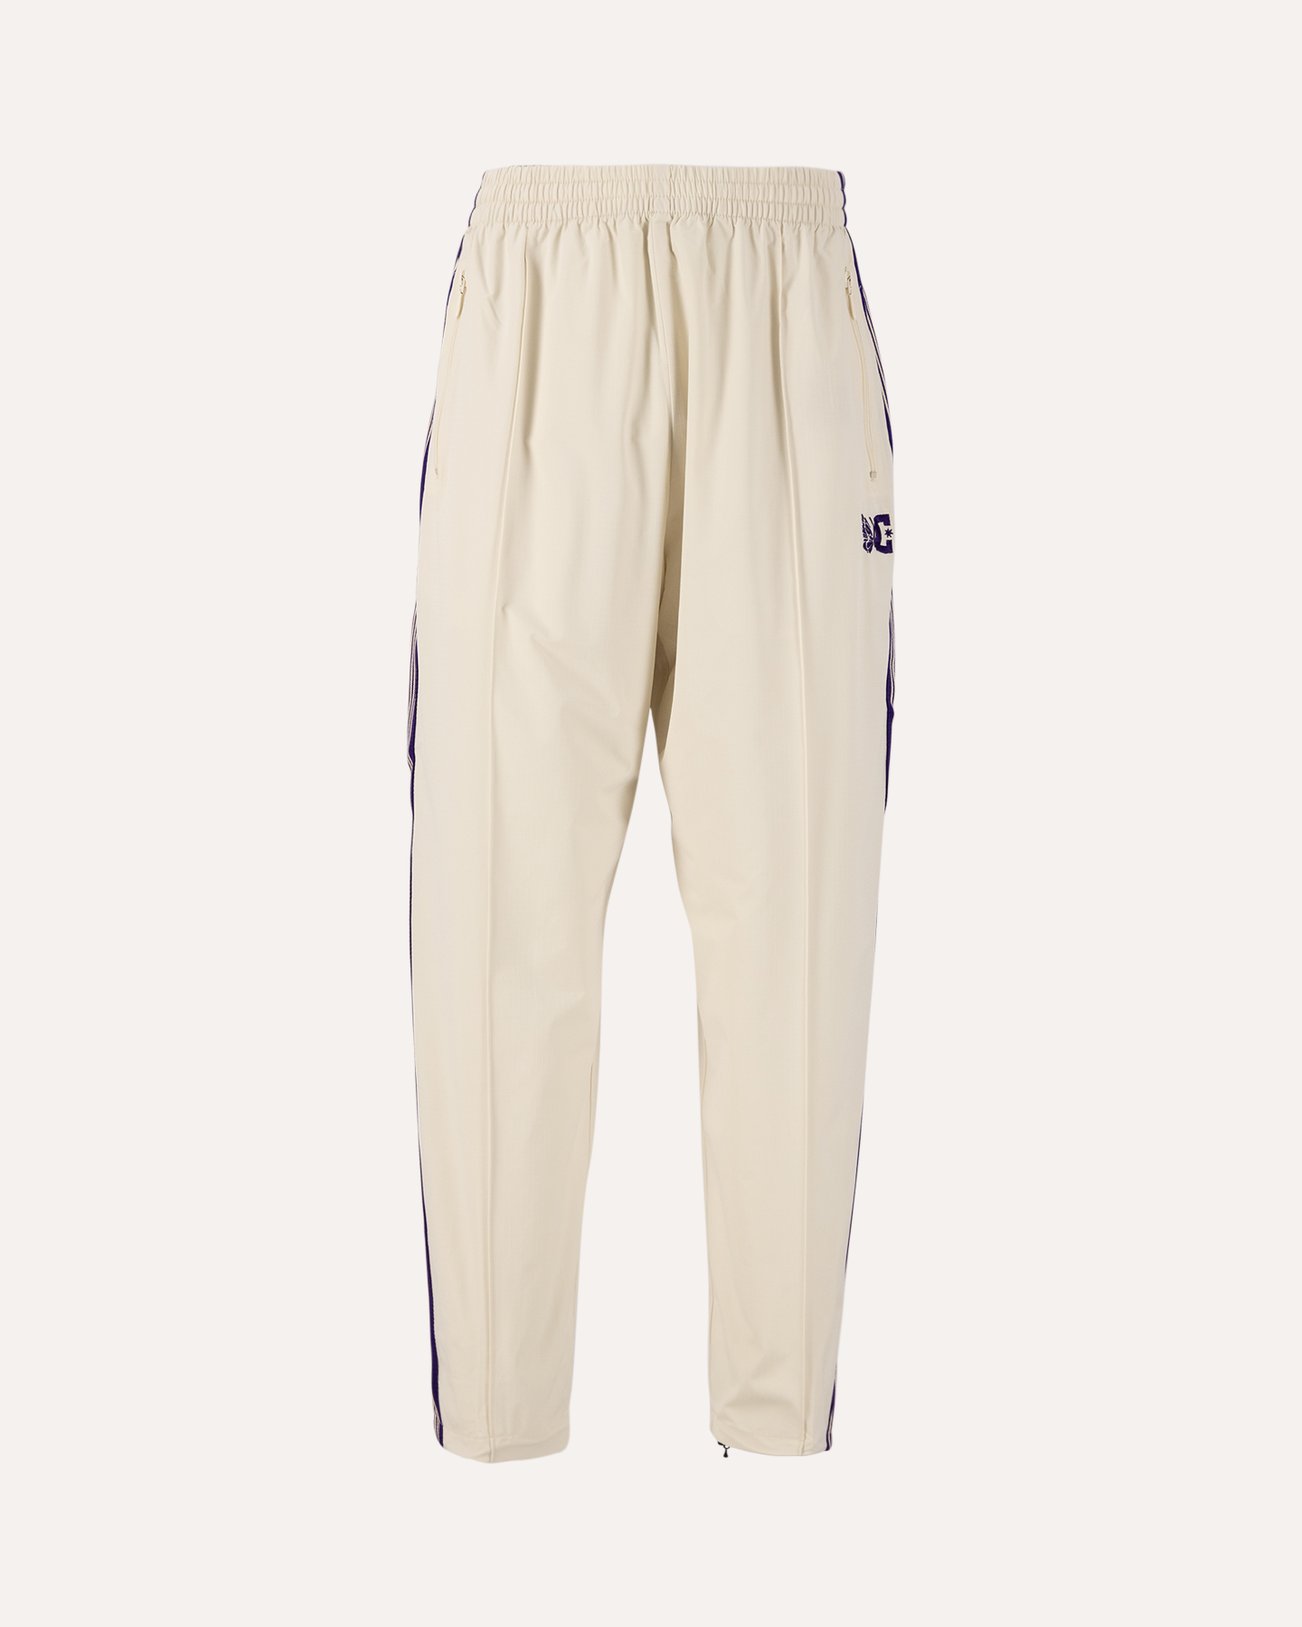 Needles Needles x DC Shoes Track Pant - Poly Ripstop BEIGE 1